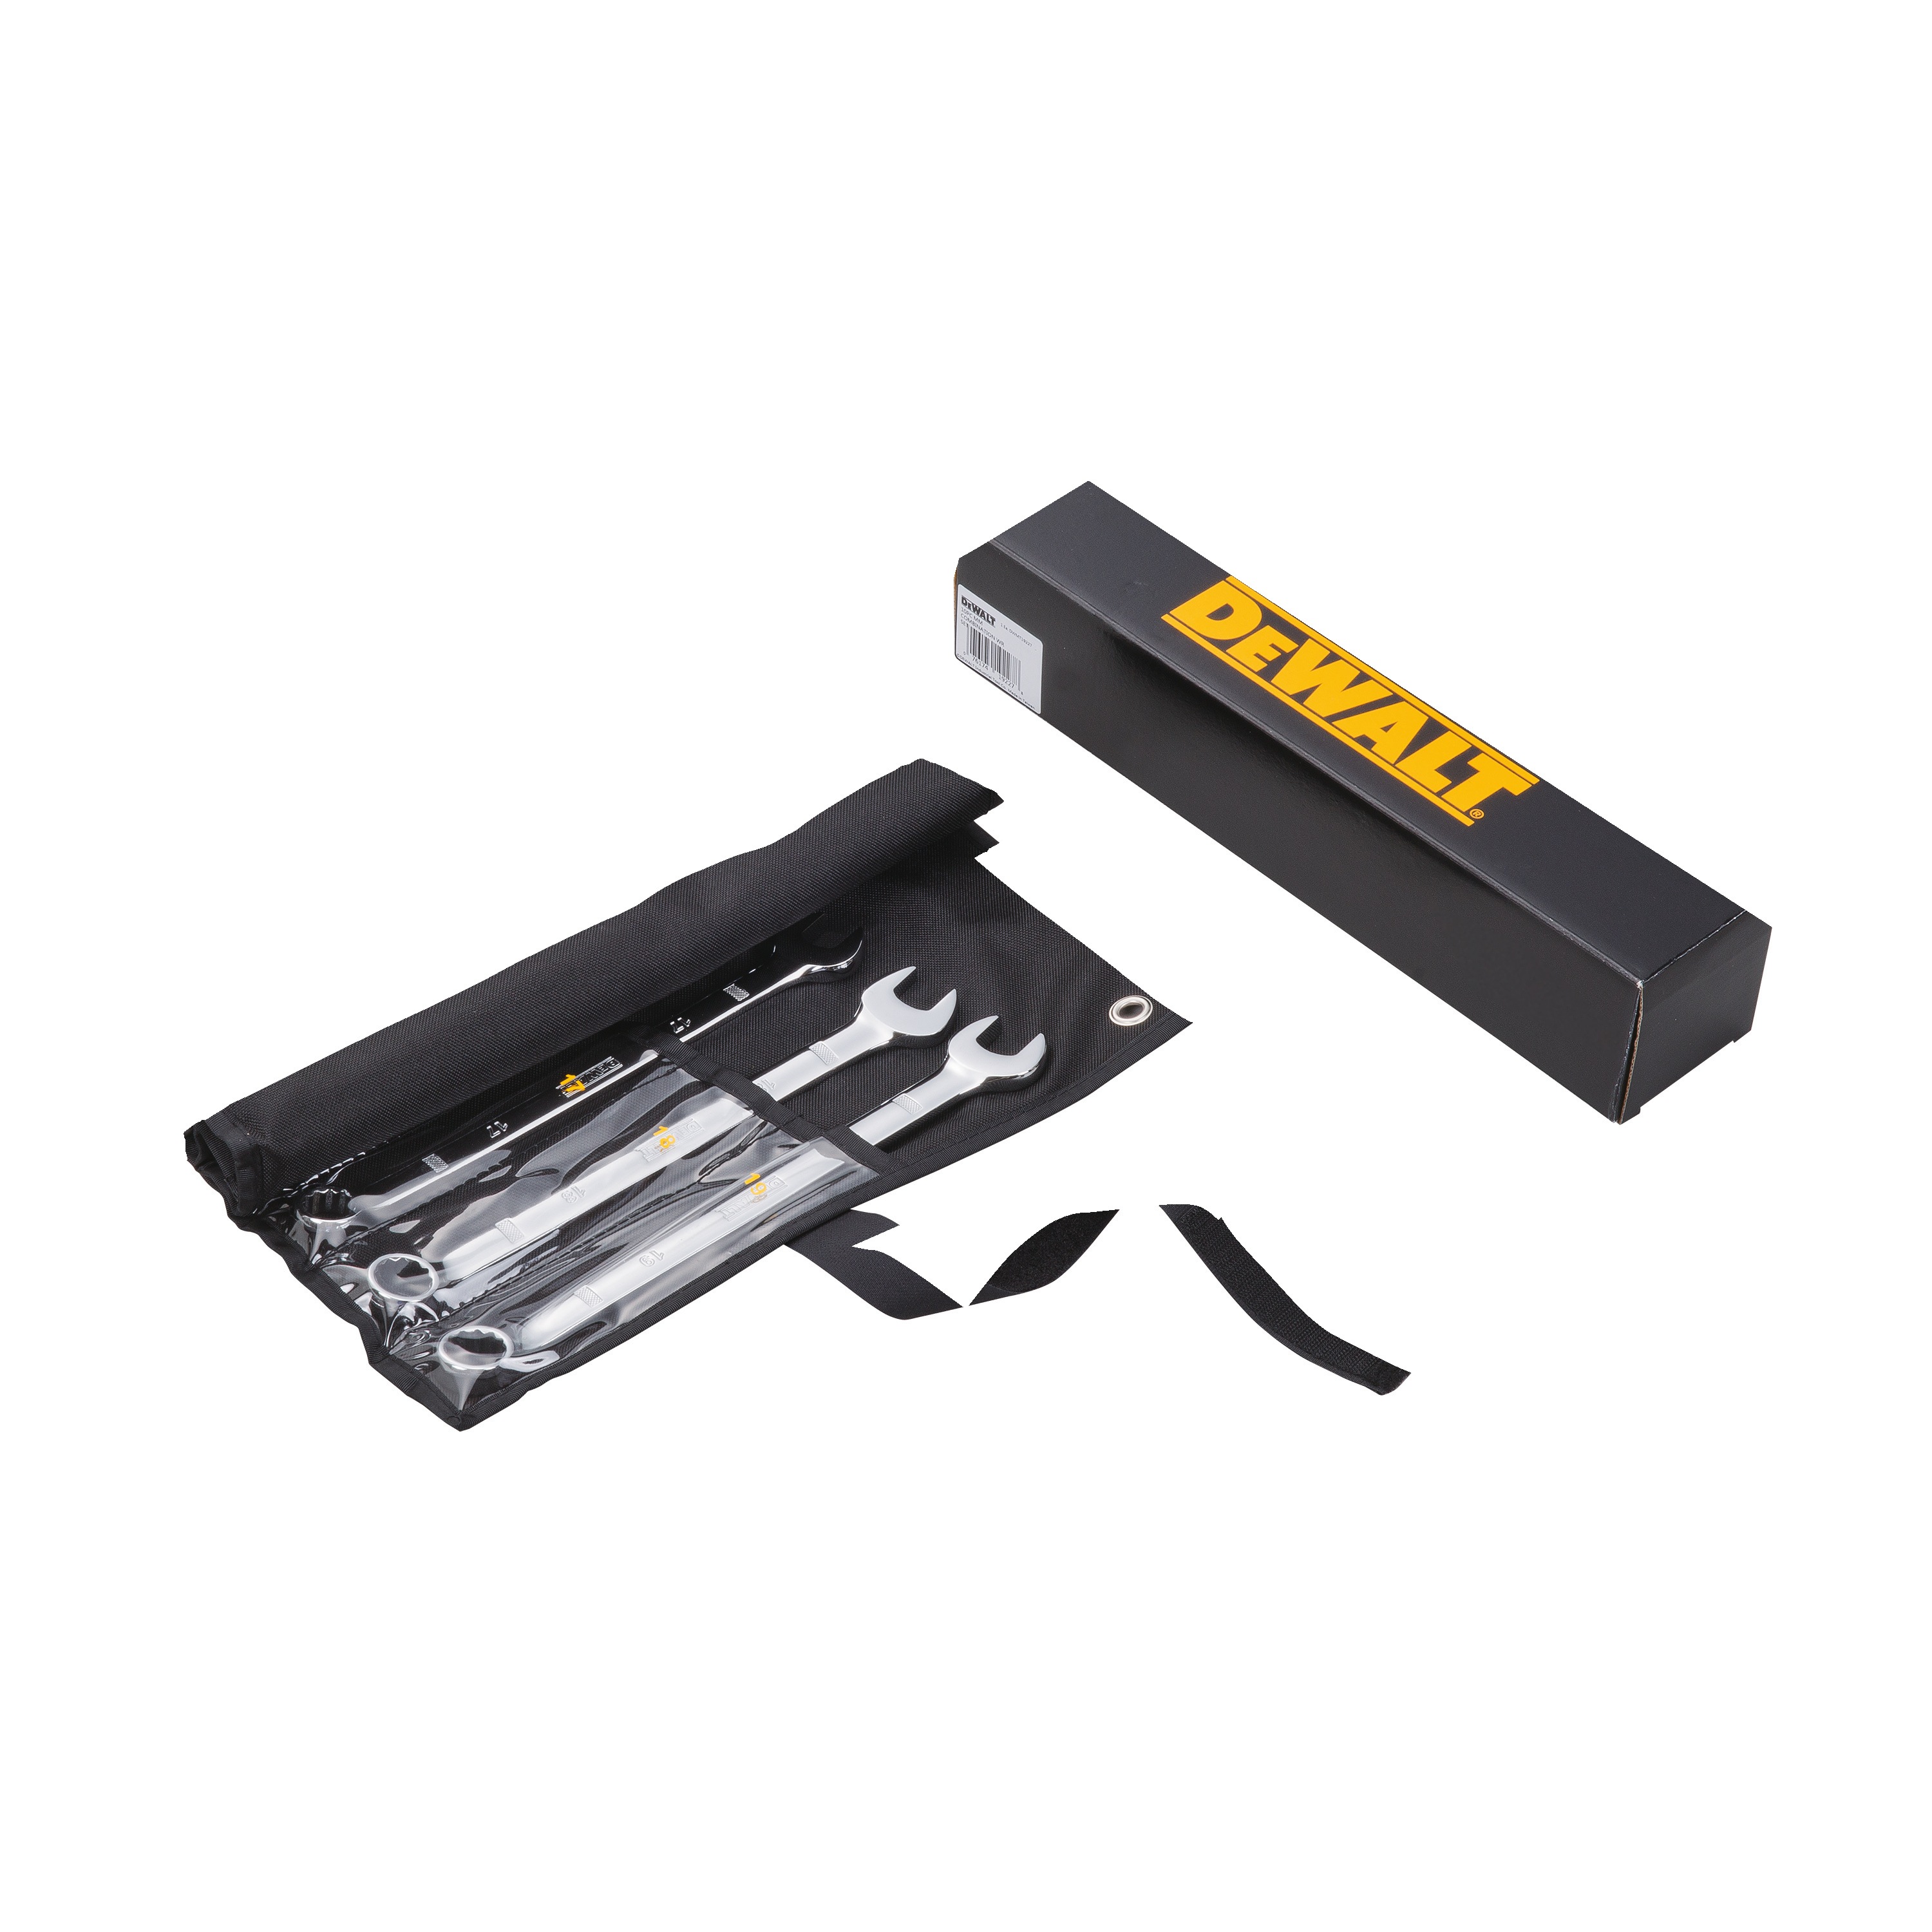 DEWALT 10 piece combination metric wrench set with its case.